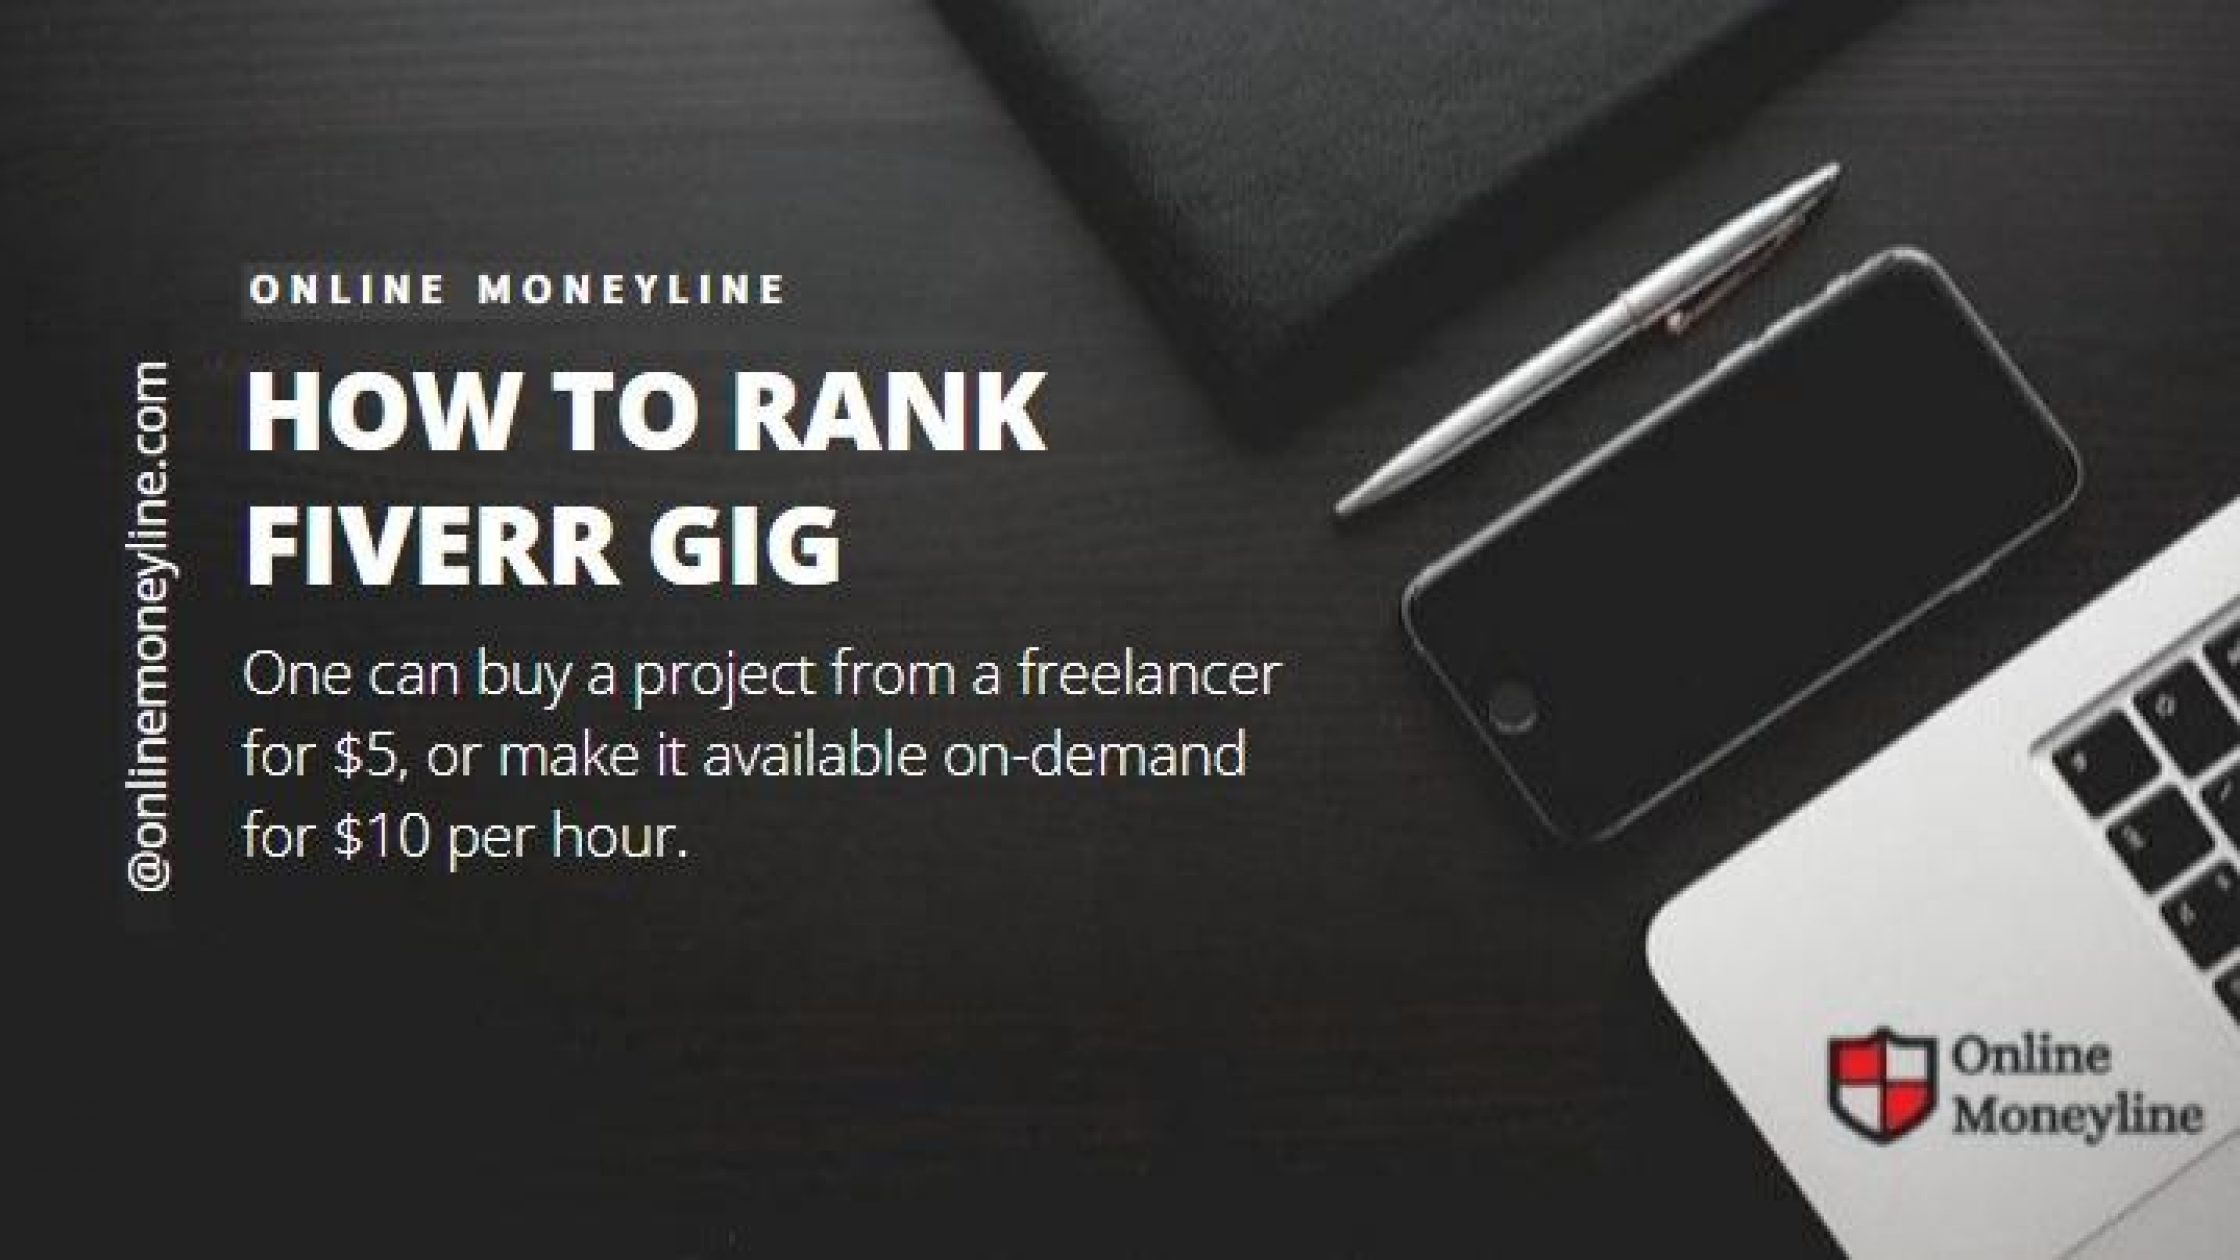 How To Rank Fiverr Gig